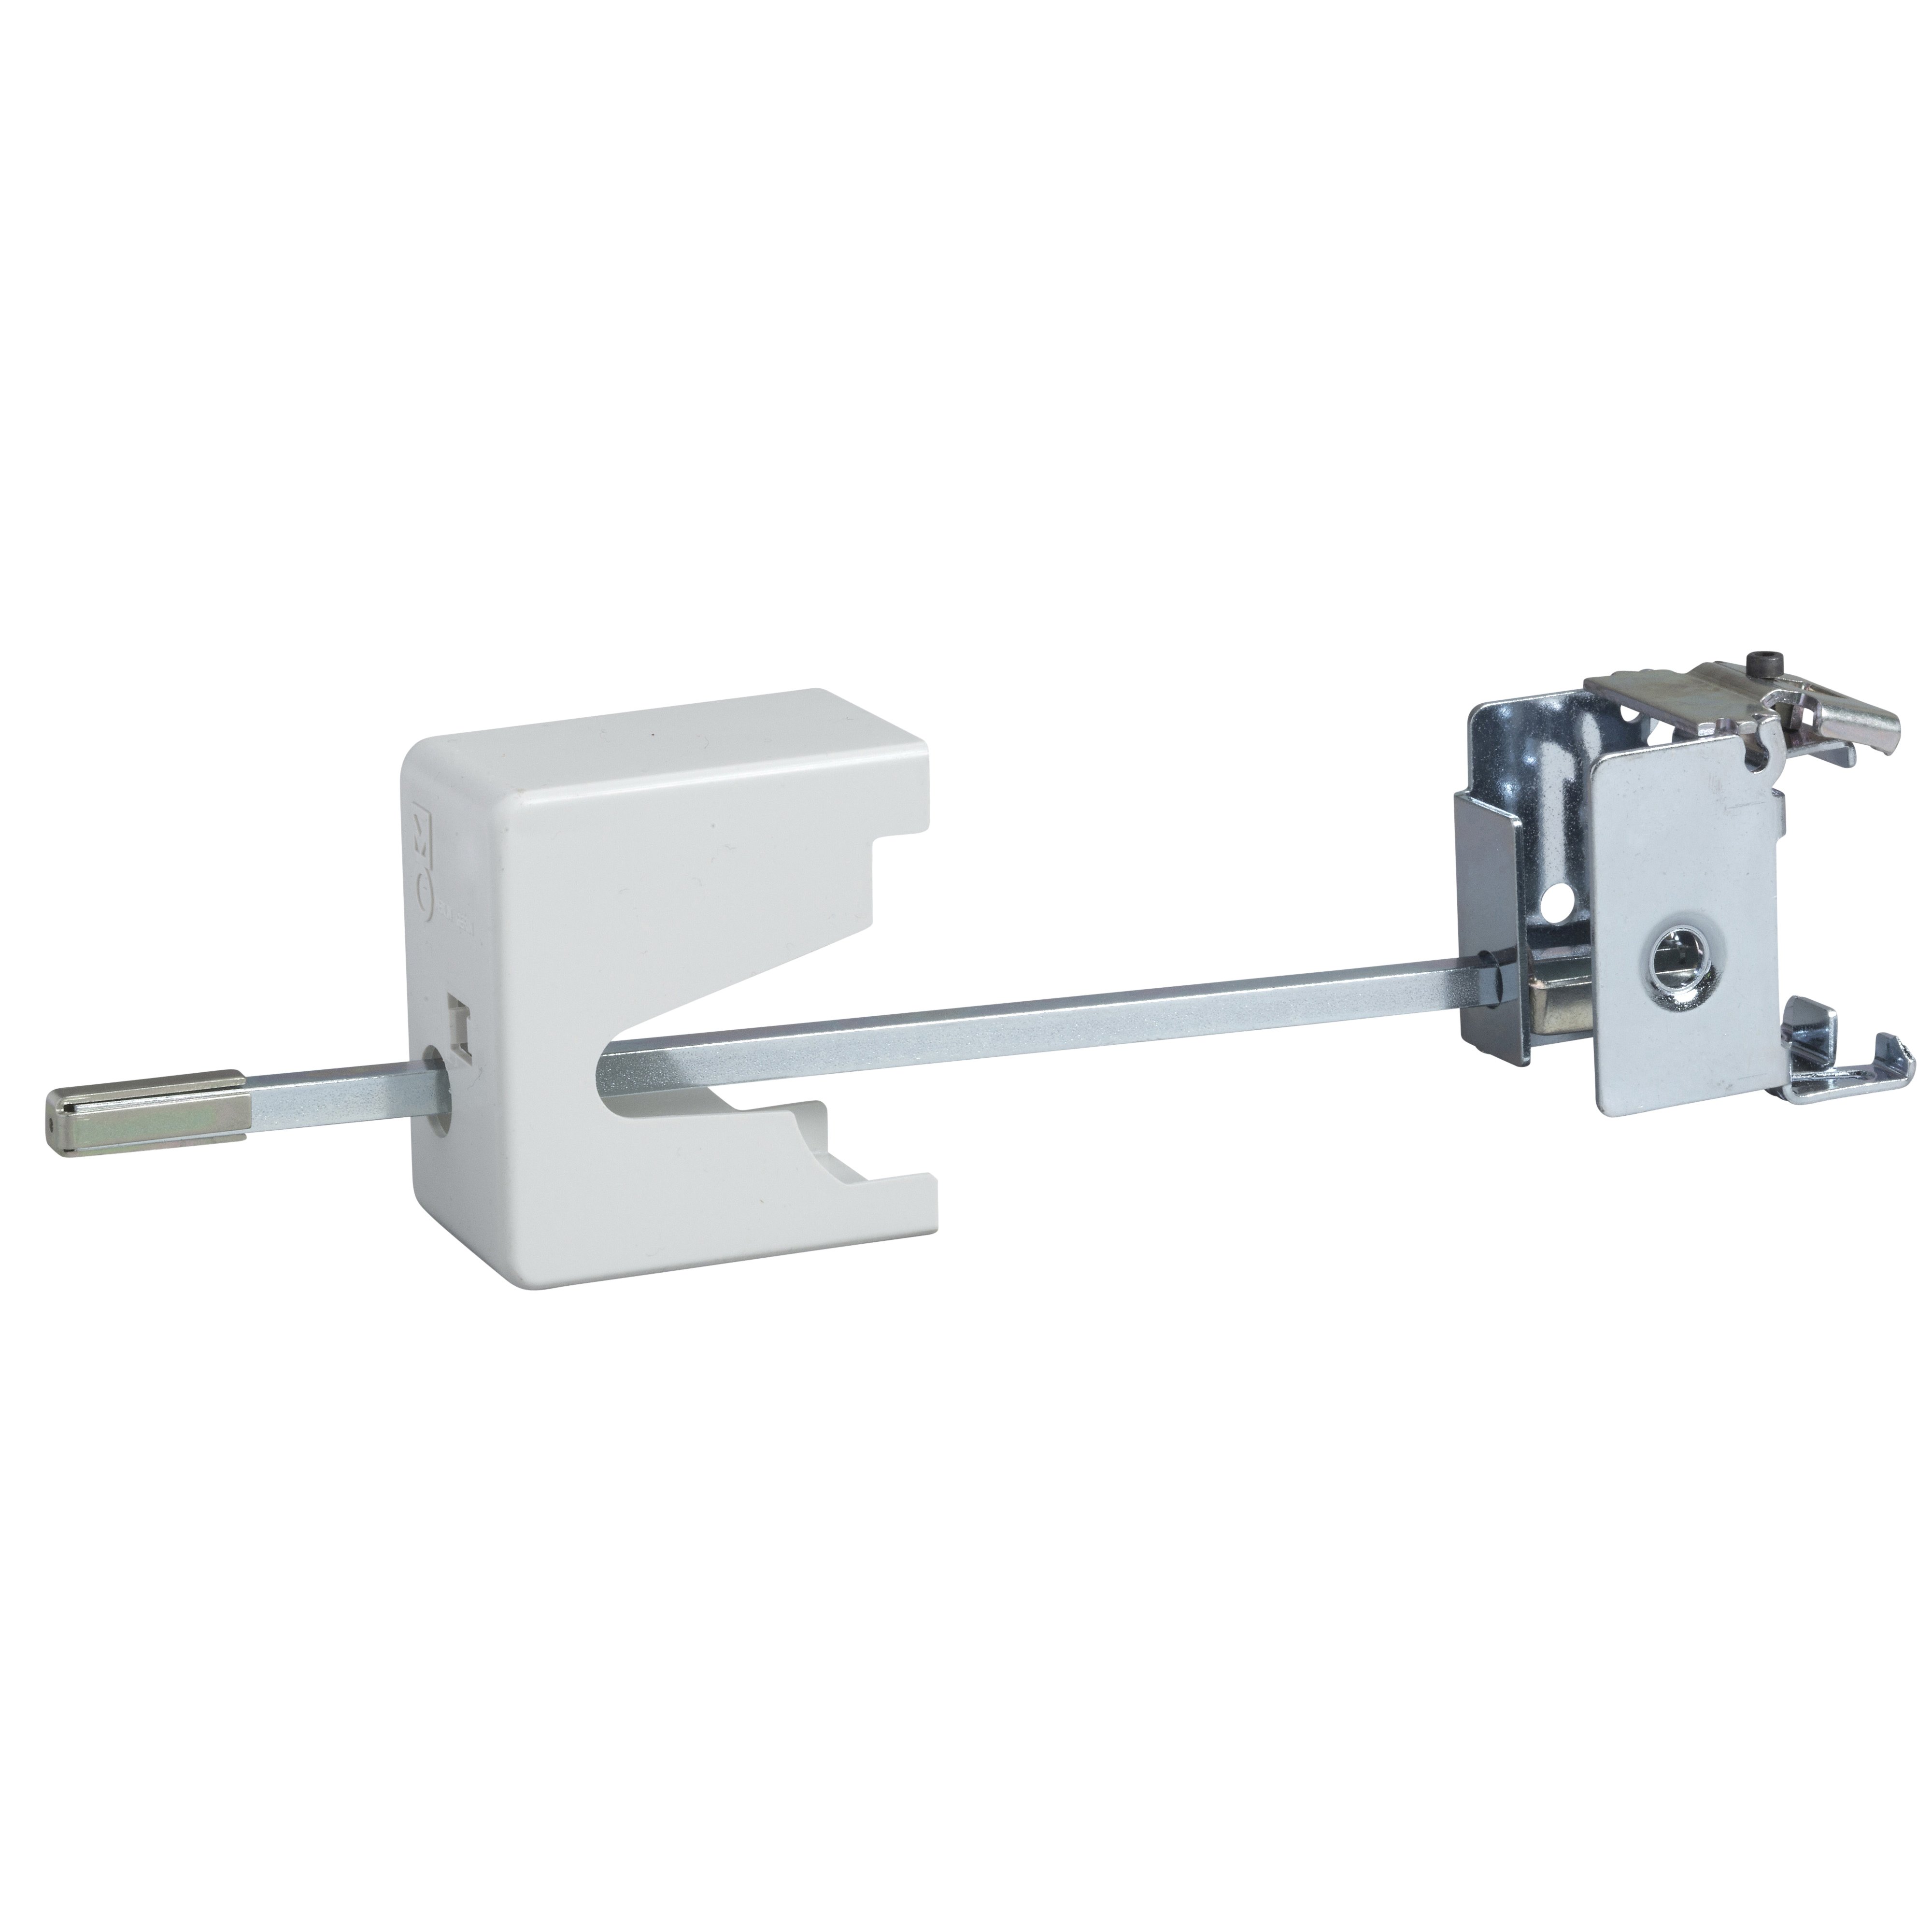 SQUARE D MG27046 : MULTI 9 ROTARY HANDLE